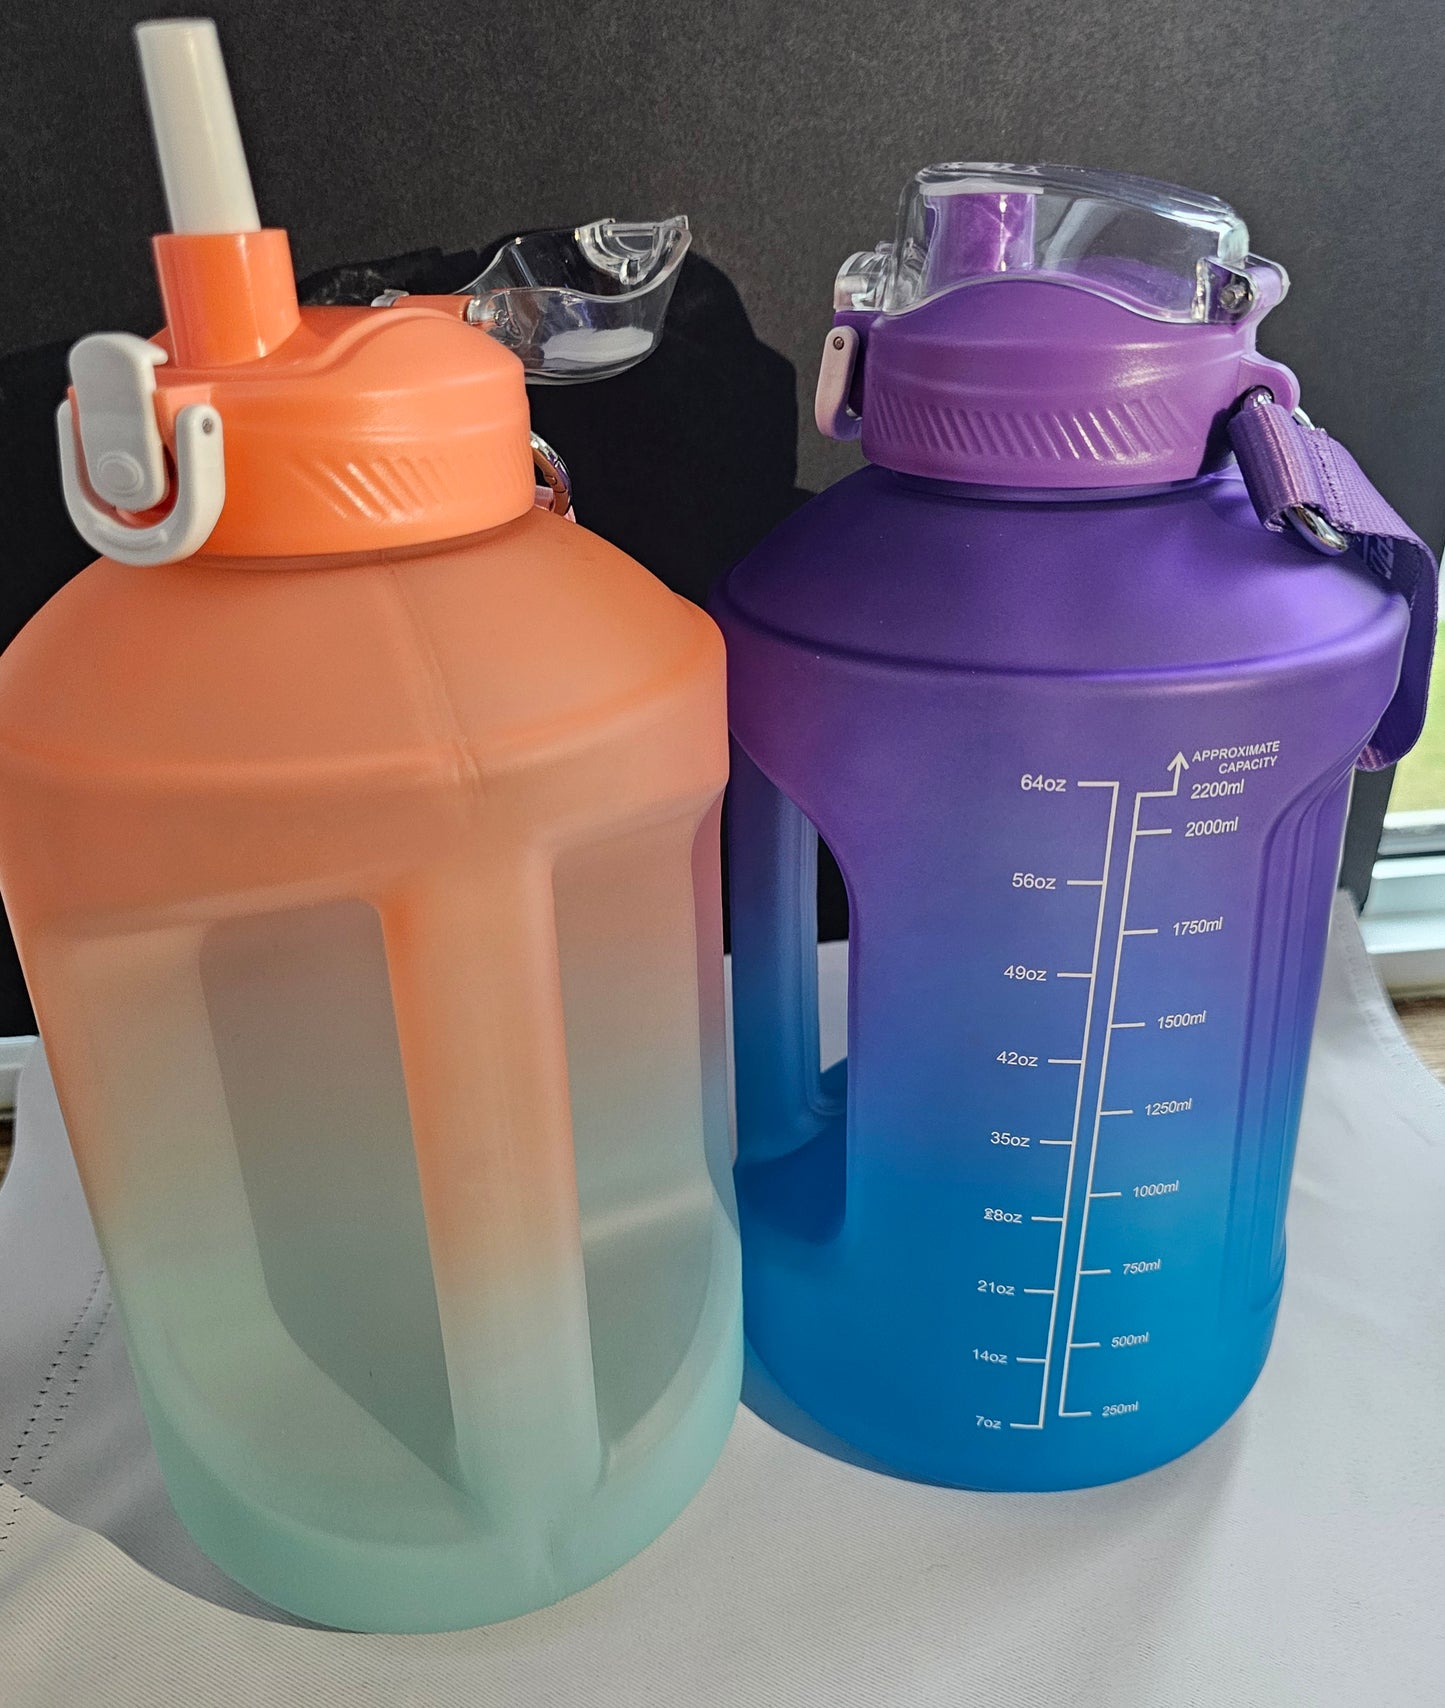 64oz Large Gallon Jug Water Bottle with Cleaning Brush Covered Straw Spout and Carrying Handle Strap Perfect for Gym, Home, Work and Sports.